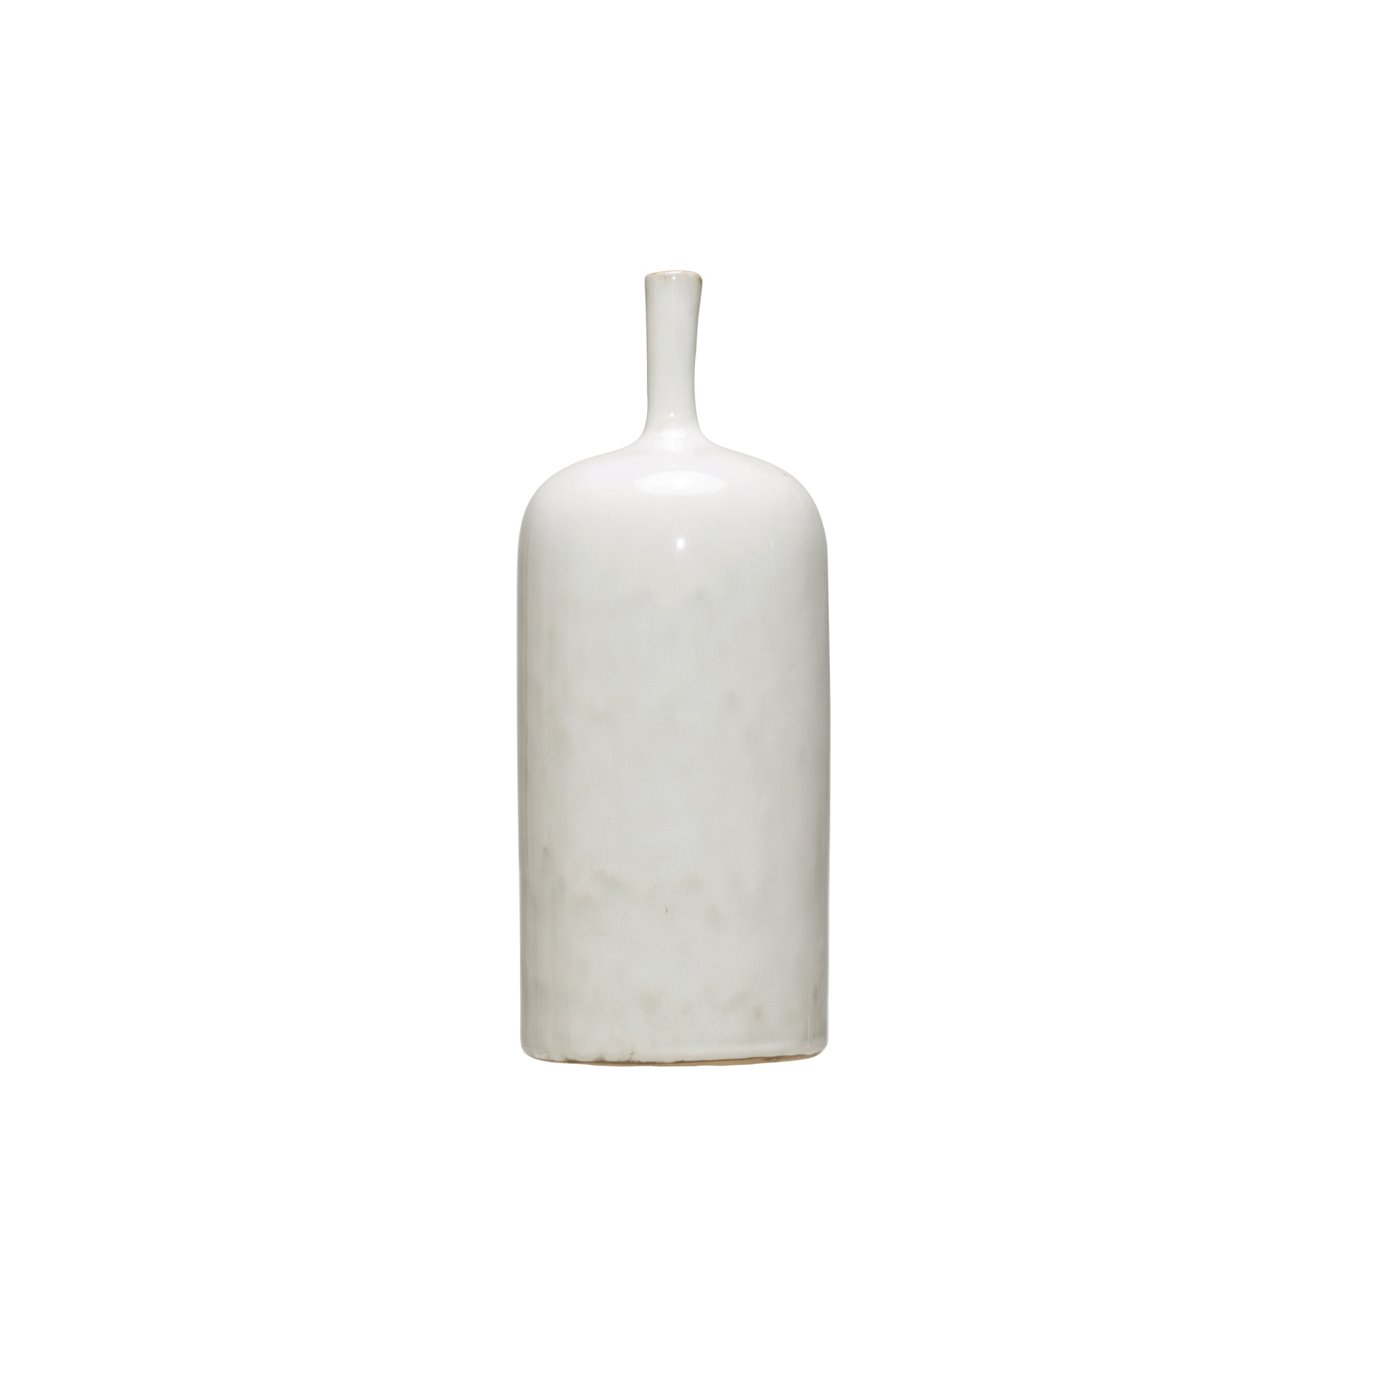 Large Cream Stoneware Vase with Green Accents & Reactive Glaze Finish (Each one will vary)